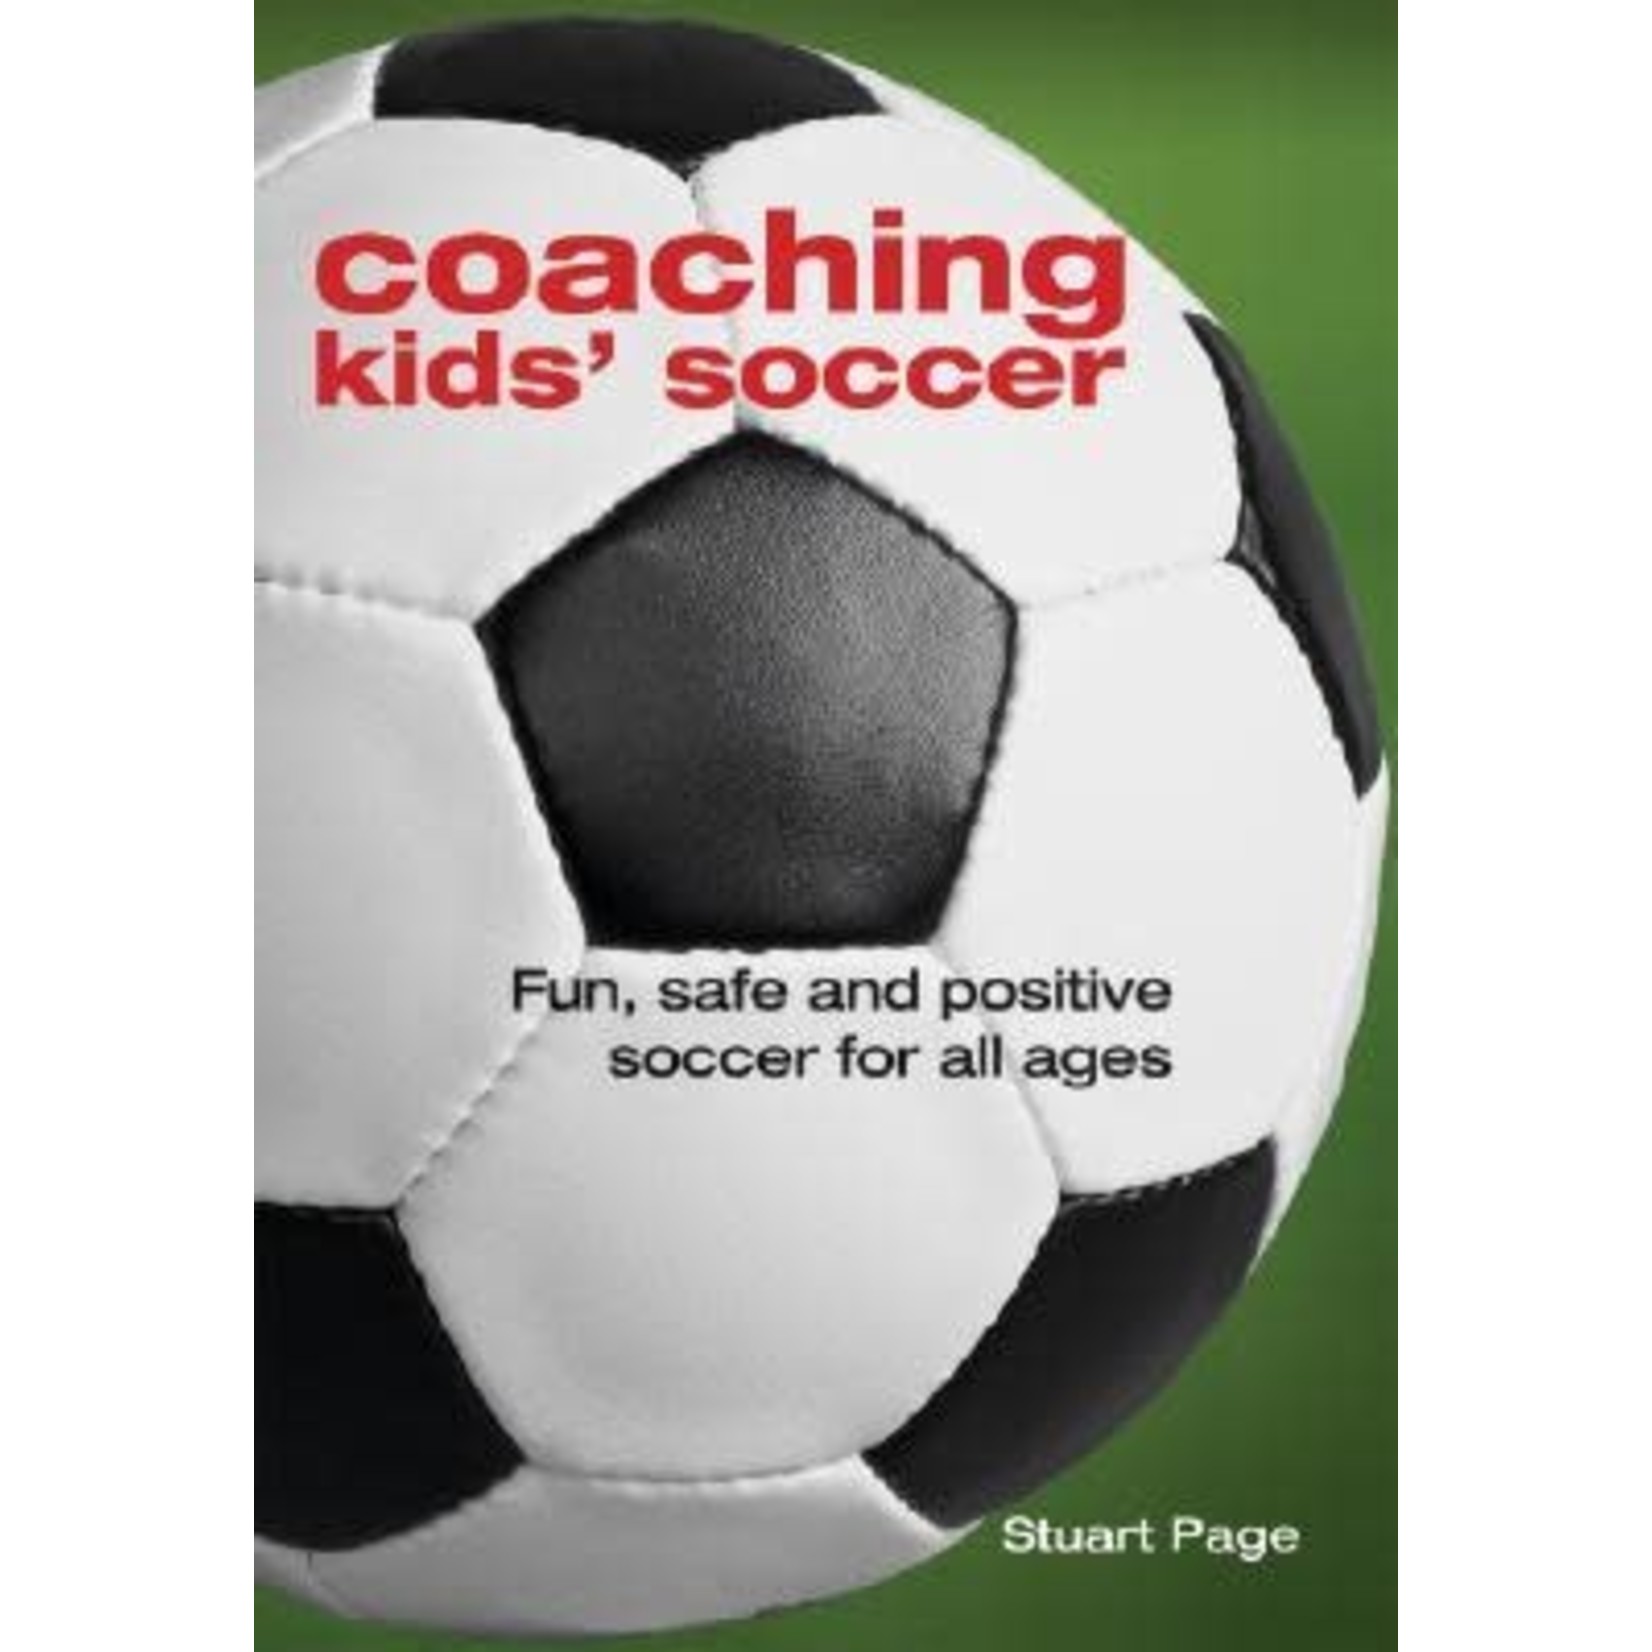 Coaching Kid's Soccer - Fun, Safe And Positive Soccer For All Ages